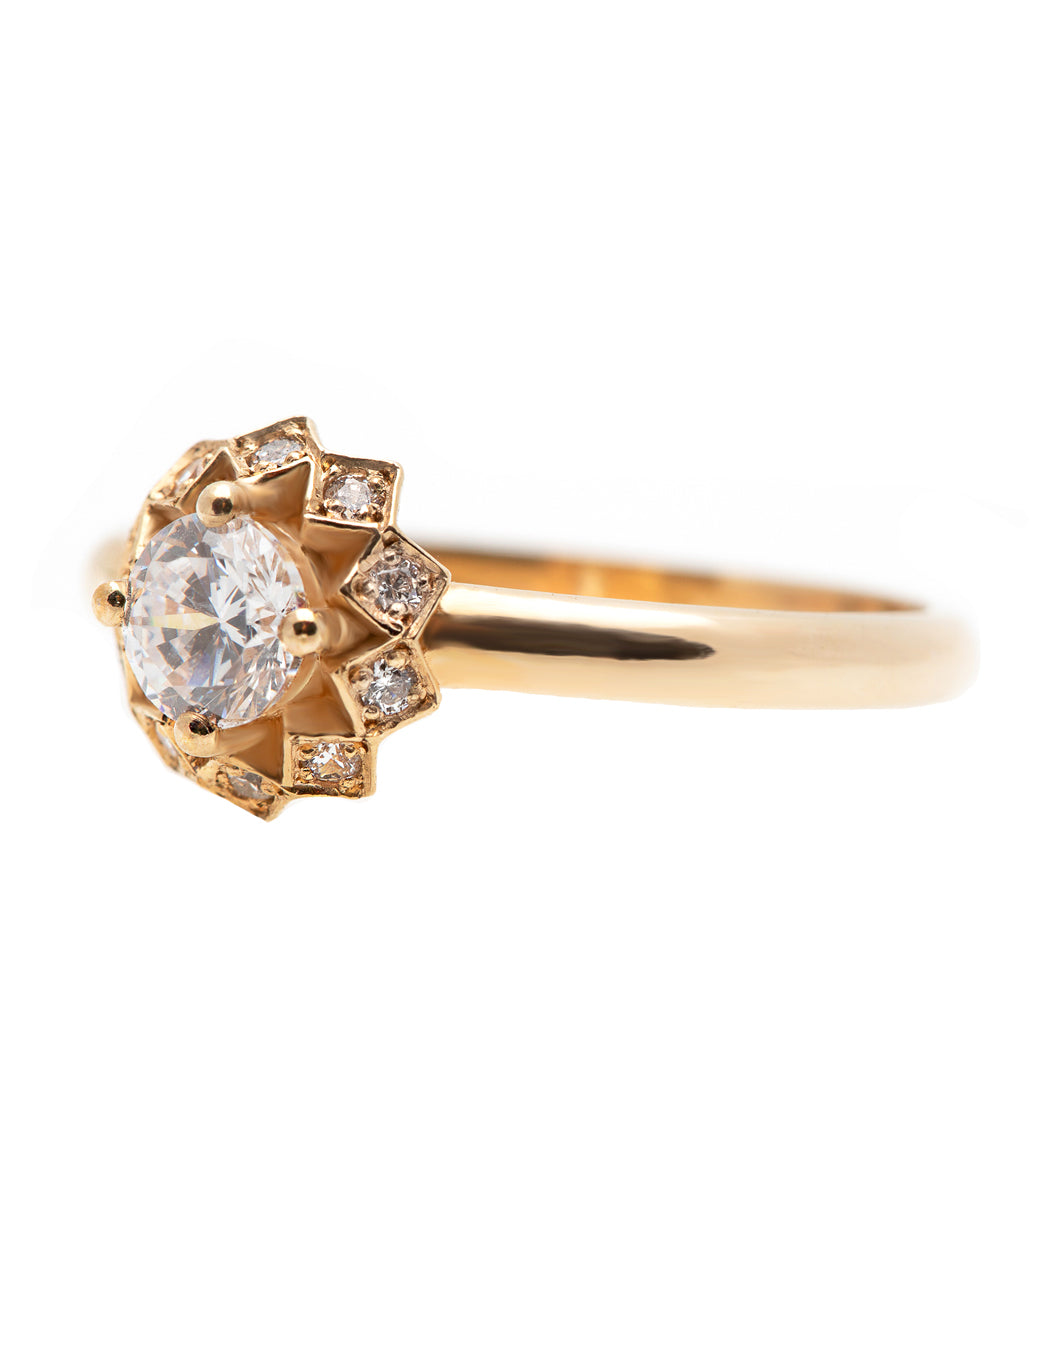 A delicate 14k yellow gold engagement ring, set with a center brilliant cut white diamond and smaller diamonds around it, in the shape of a geometric flower. 